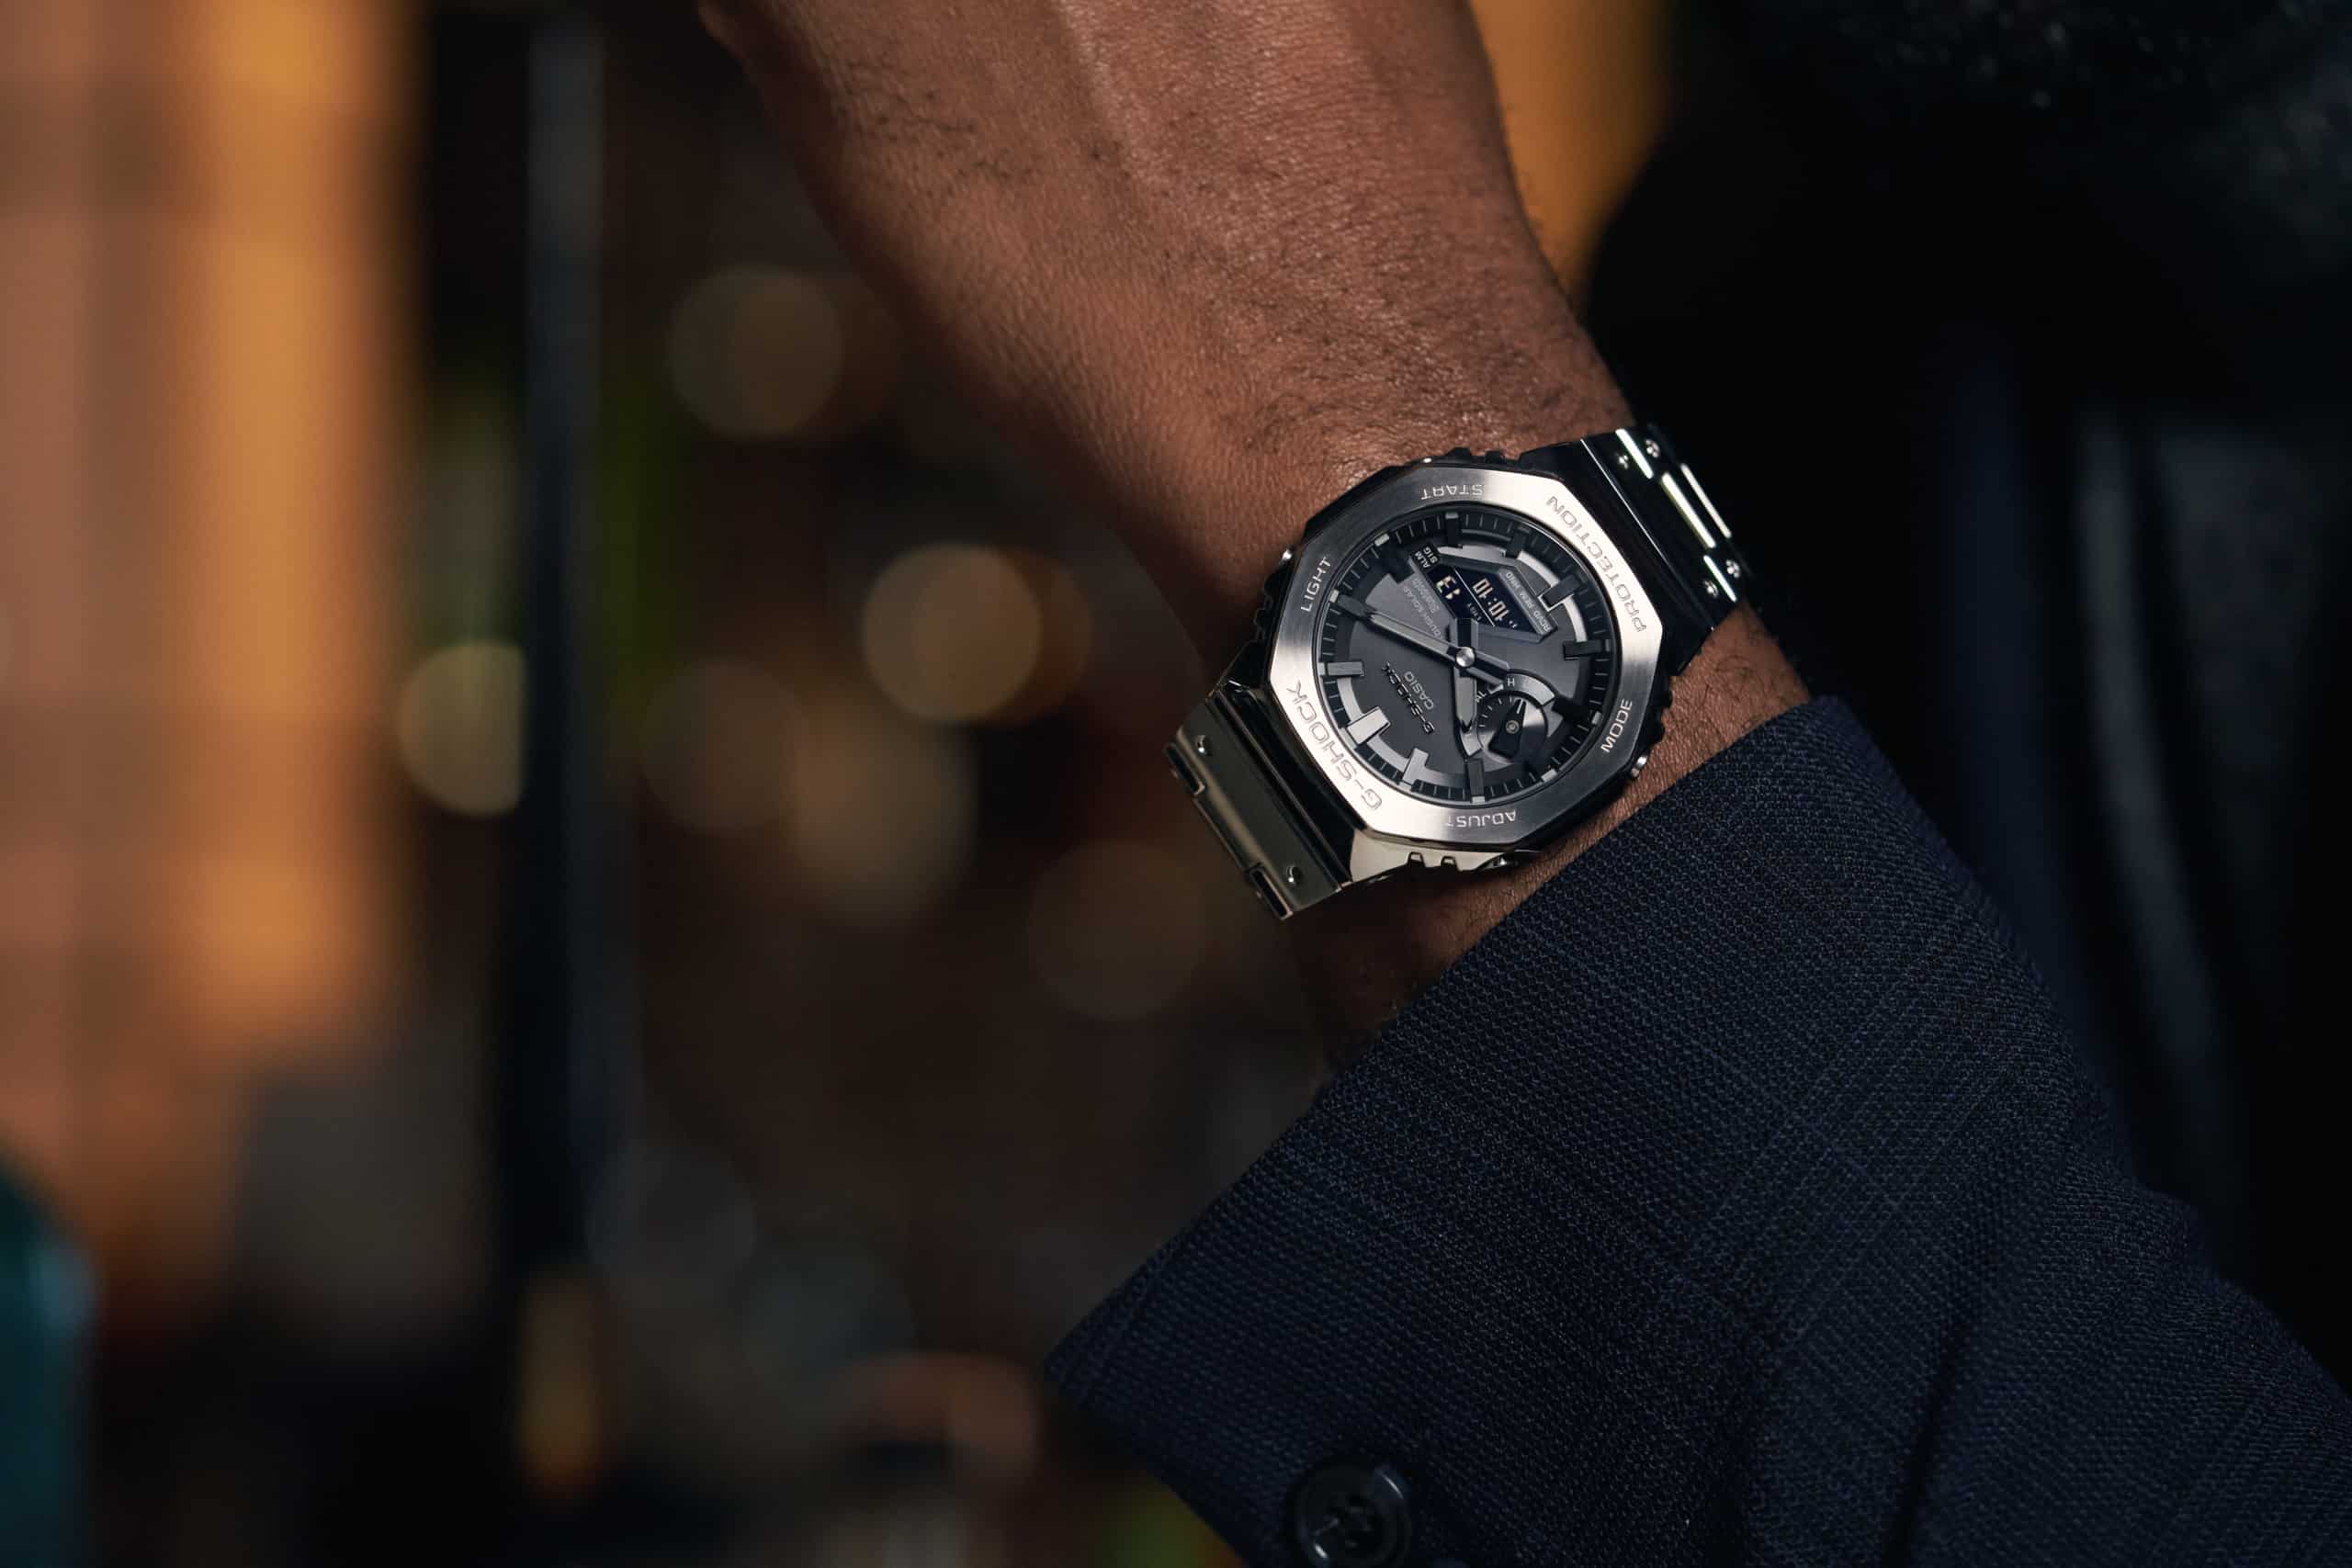 Holiday Lookbook: Fit for the Festivities with G-SHOCK - Worn & Wound